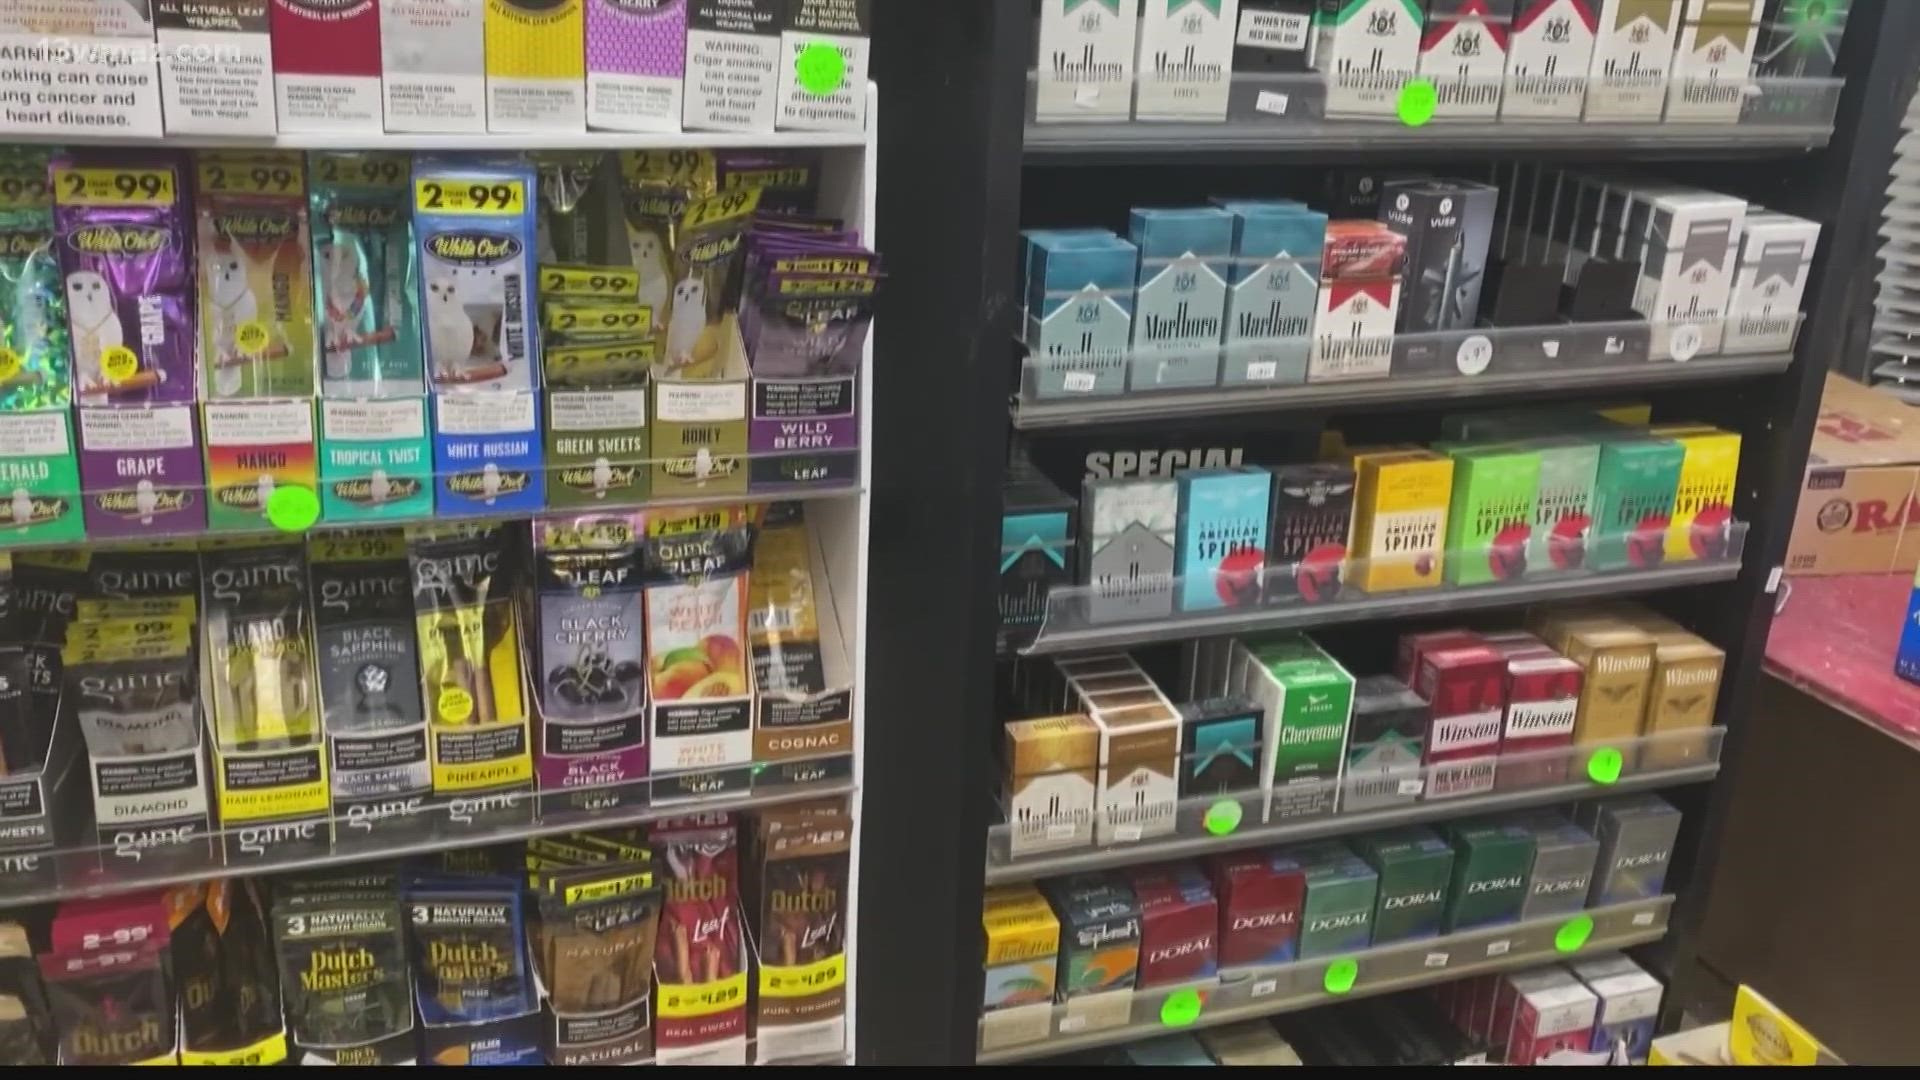 For smokers, you could see around a $0.57 increase on a 20-pack of cigarettes.